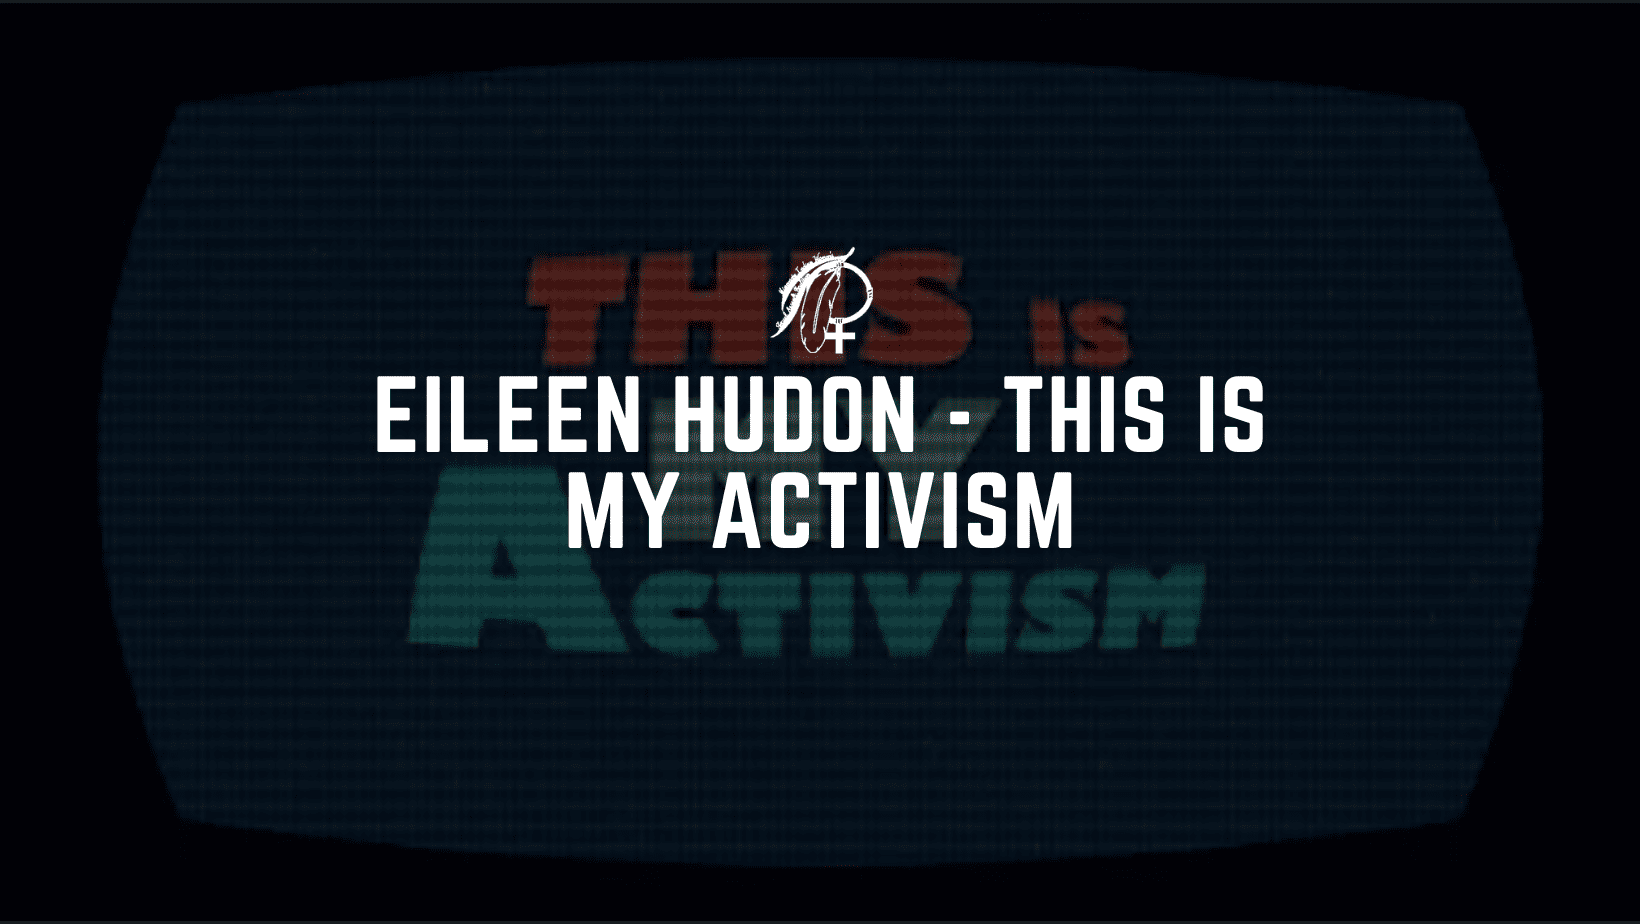 Eileen Hudon - This is My Activism